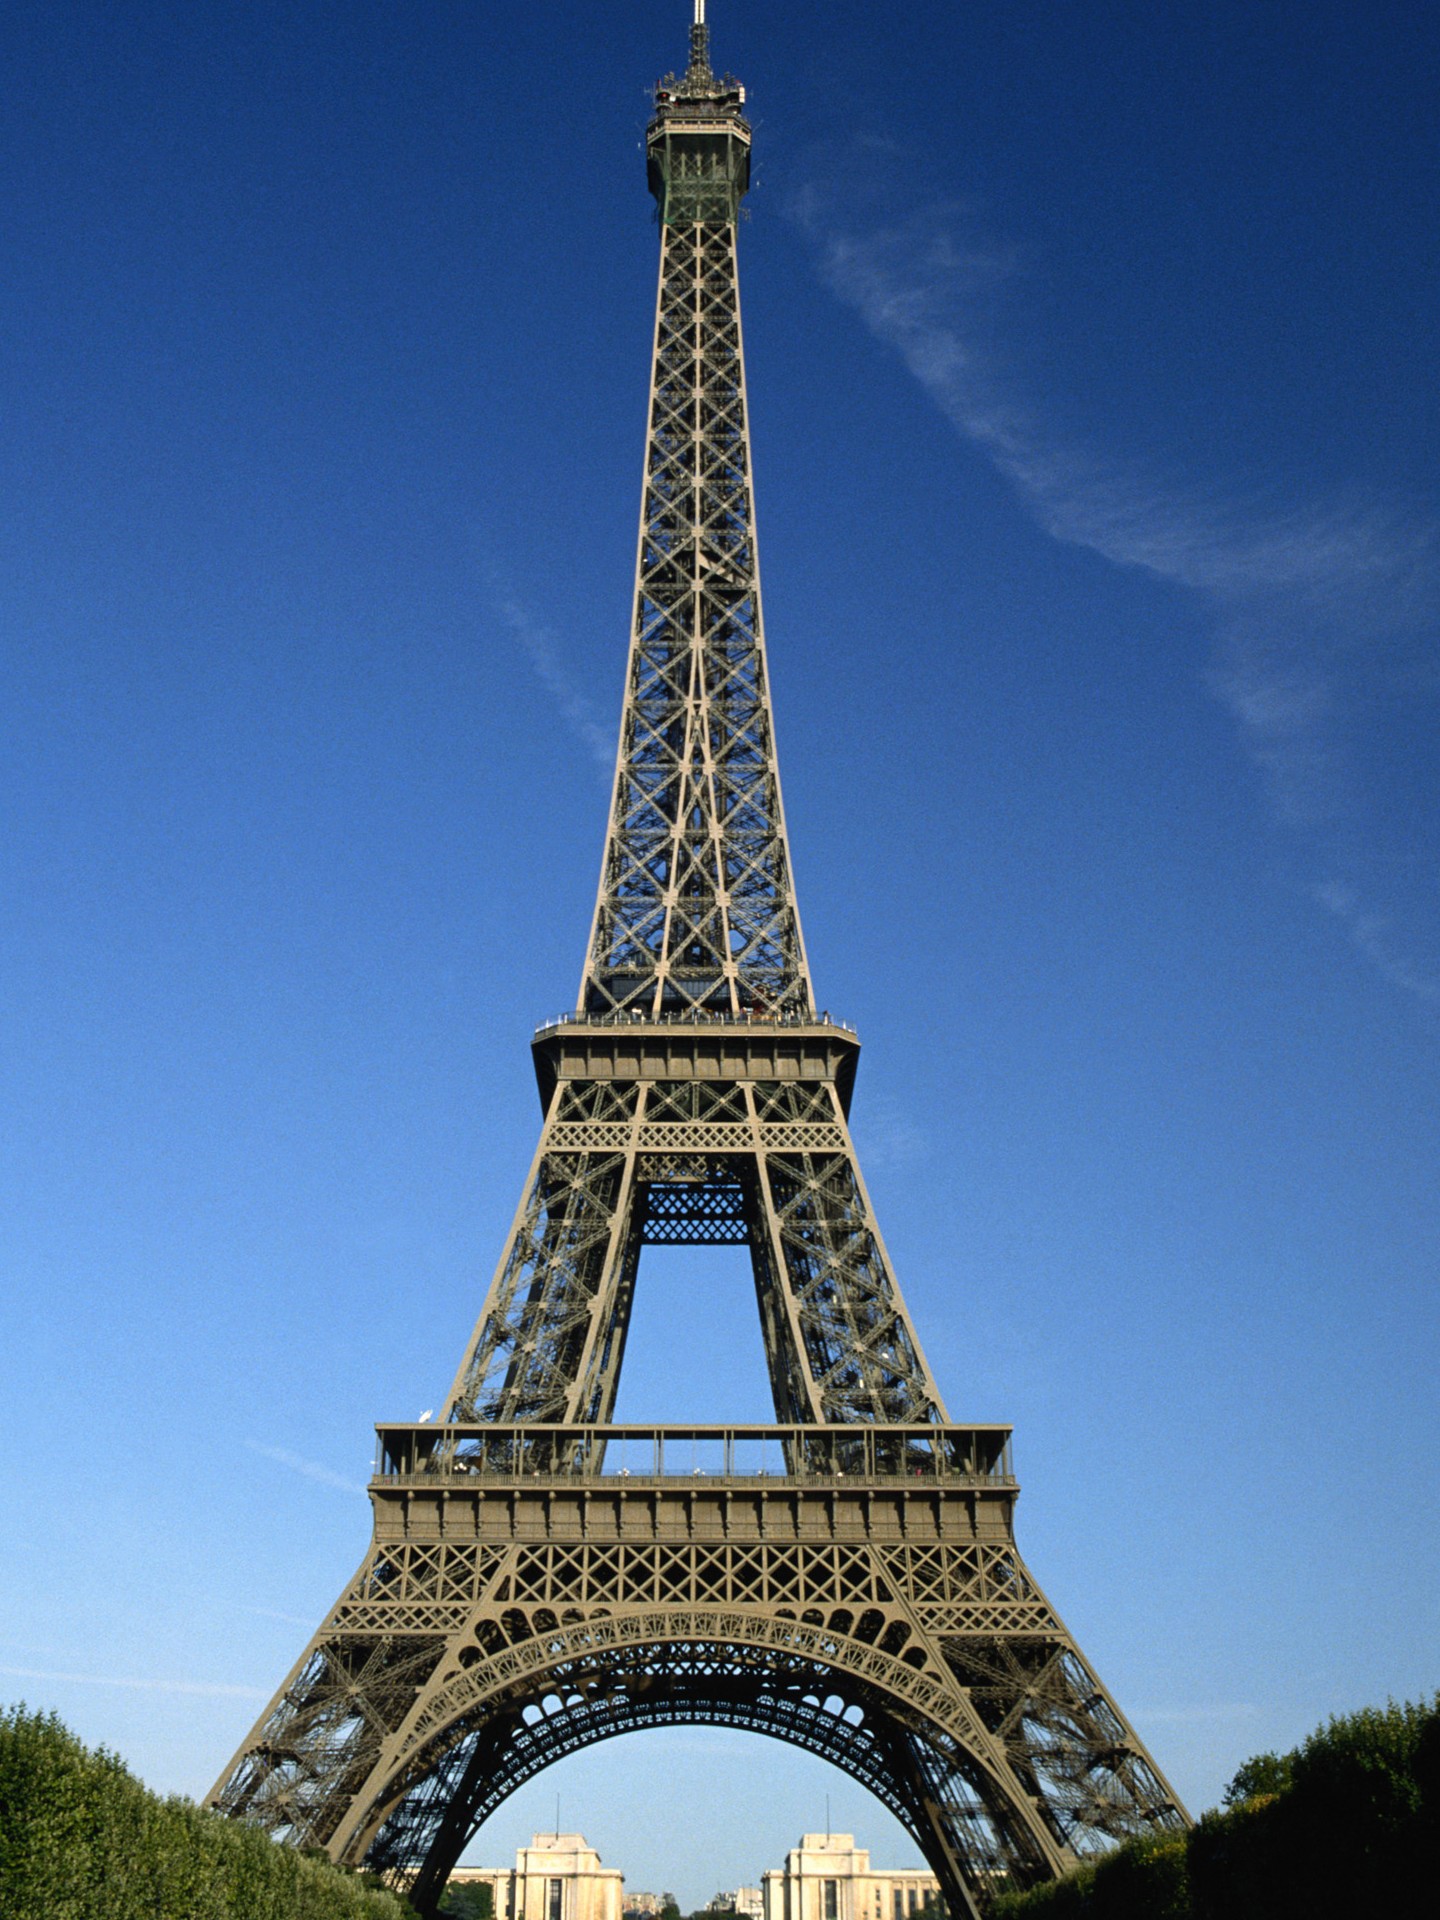 Download High quality Eiffel Tower Cities wallpaper / 1440x1920